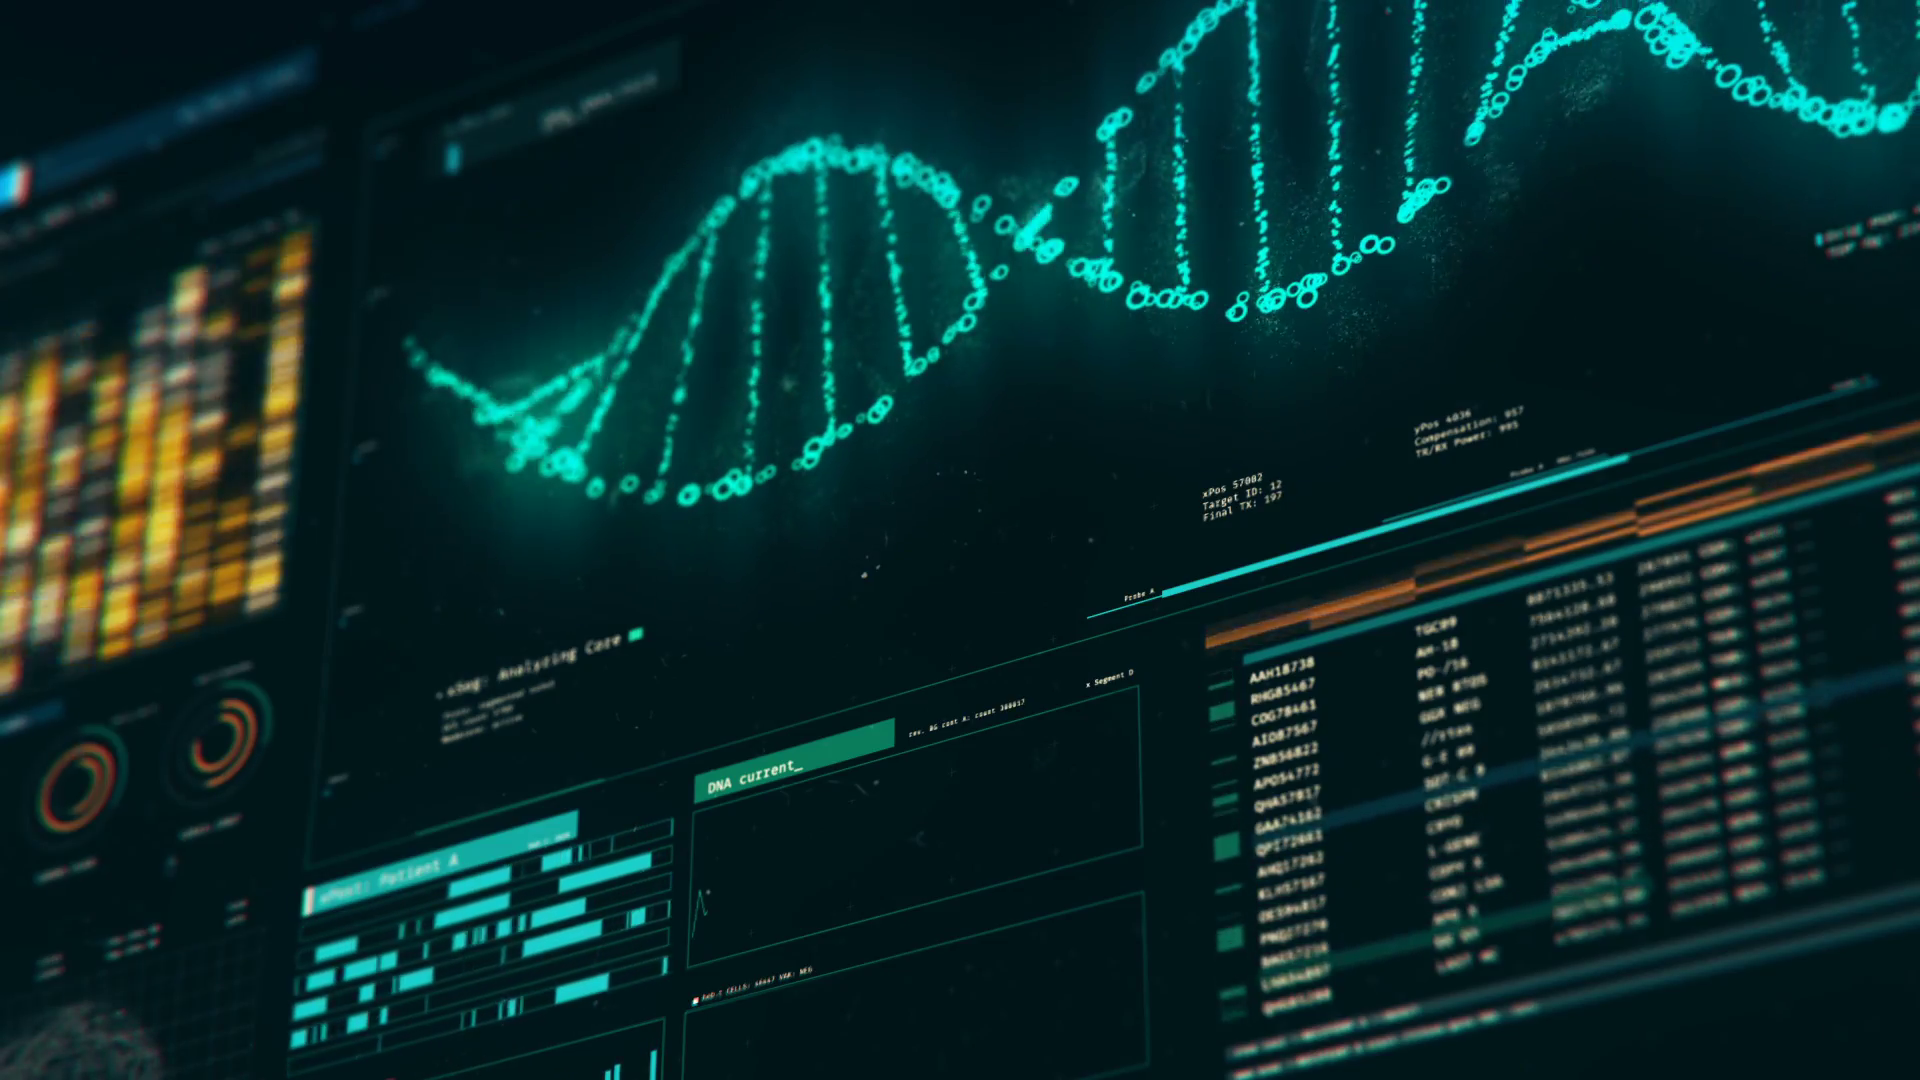 analyzing dna structure forensic research genes and genetic disorders science dna molecules analysis biochemistry statistics in graphs and charts hnid vmf F0000